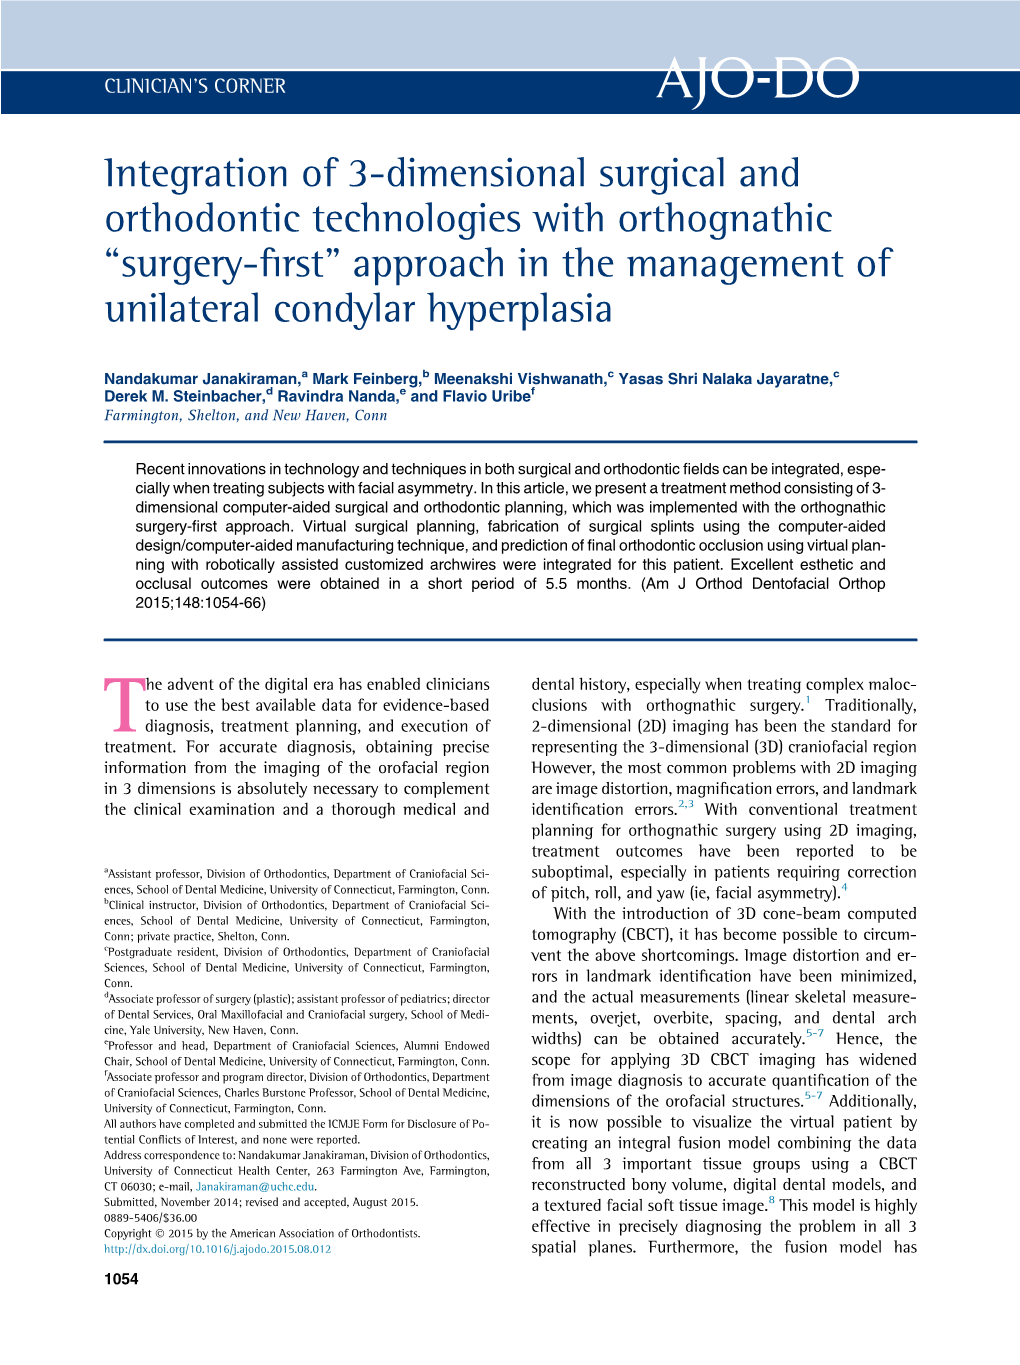 Integration of 3-Dimensional Surgical and Orthodontic Technologies with Orthognathic “Surgery-ﬁrst” Approach in the Management of Unilateral Condylar Hyperplasia